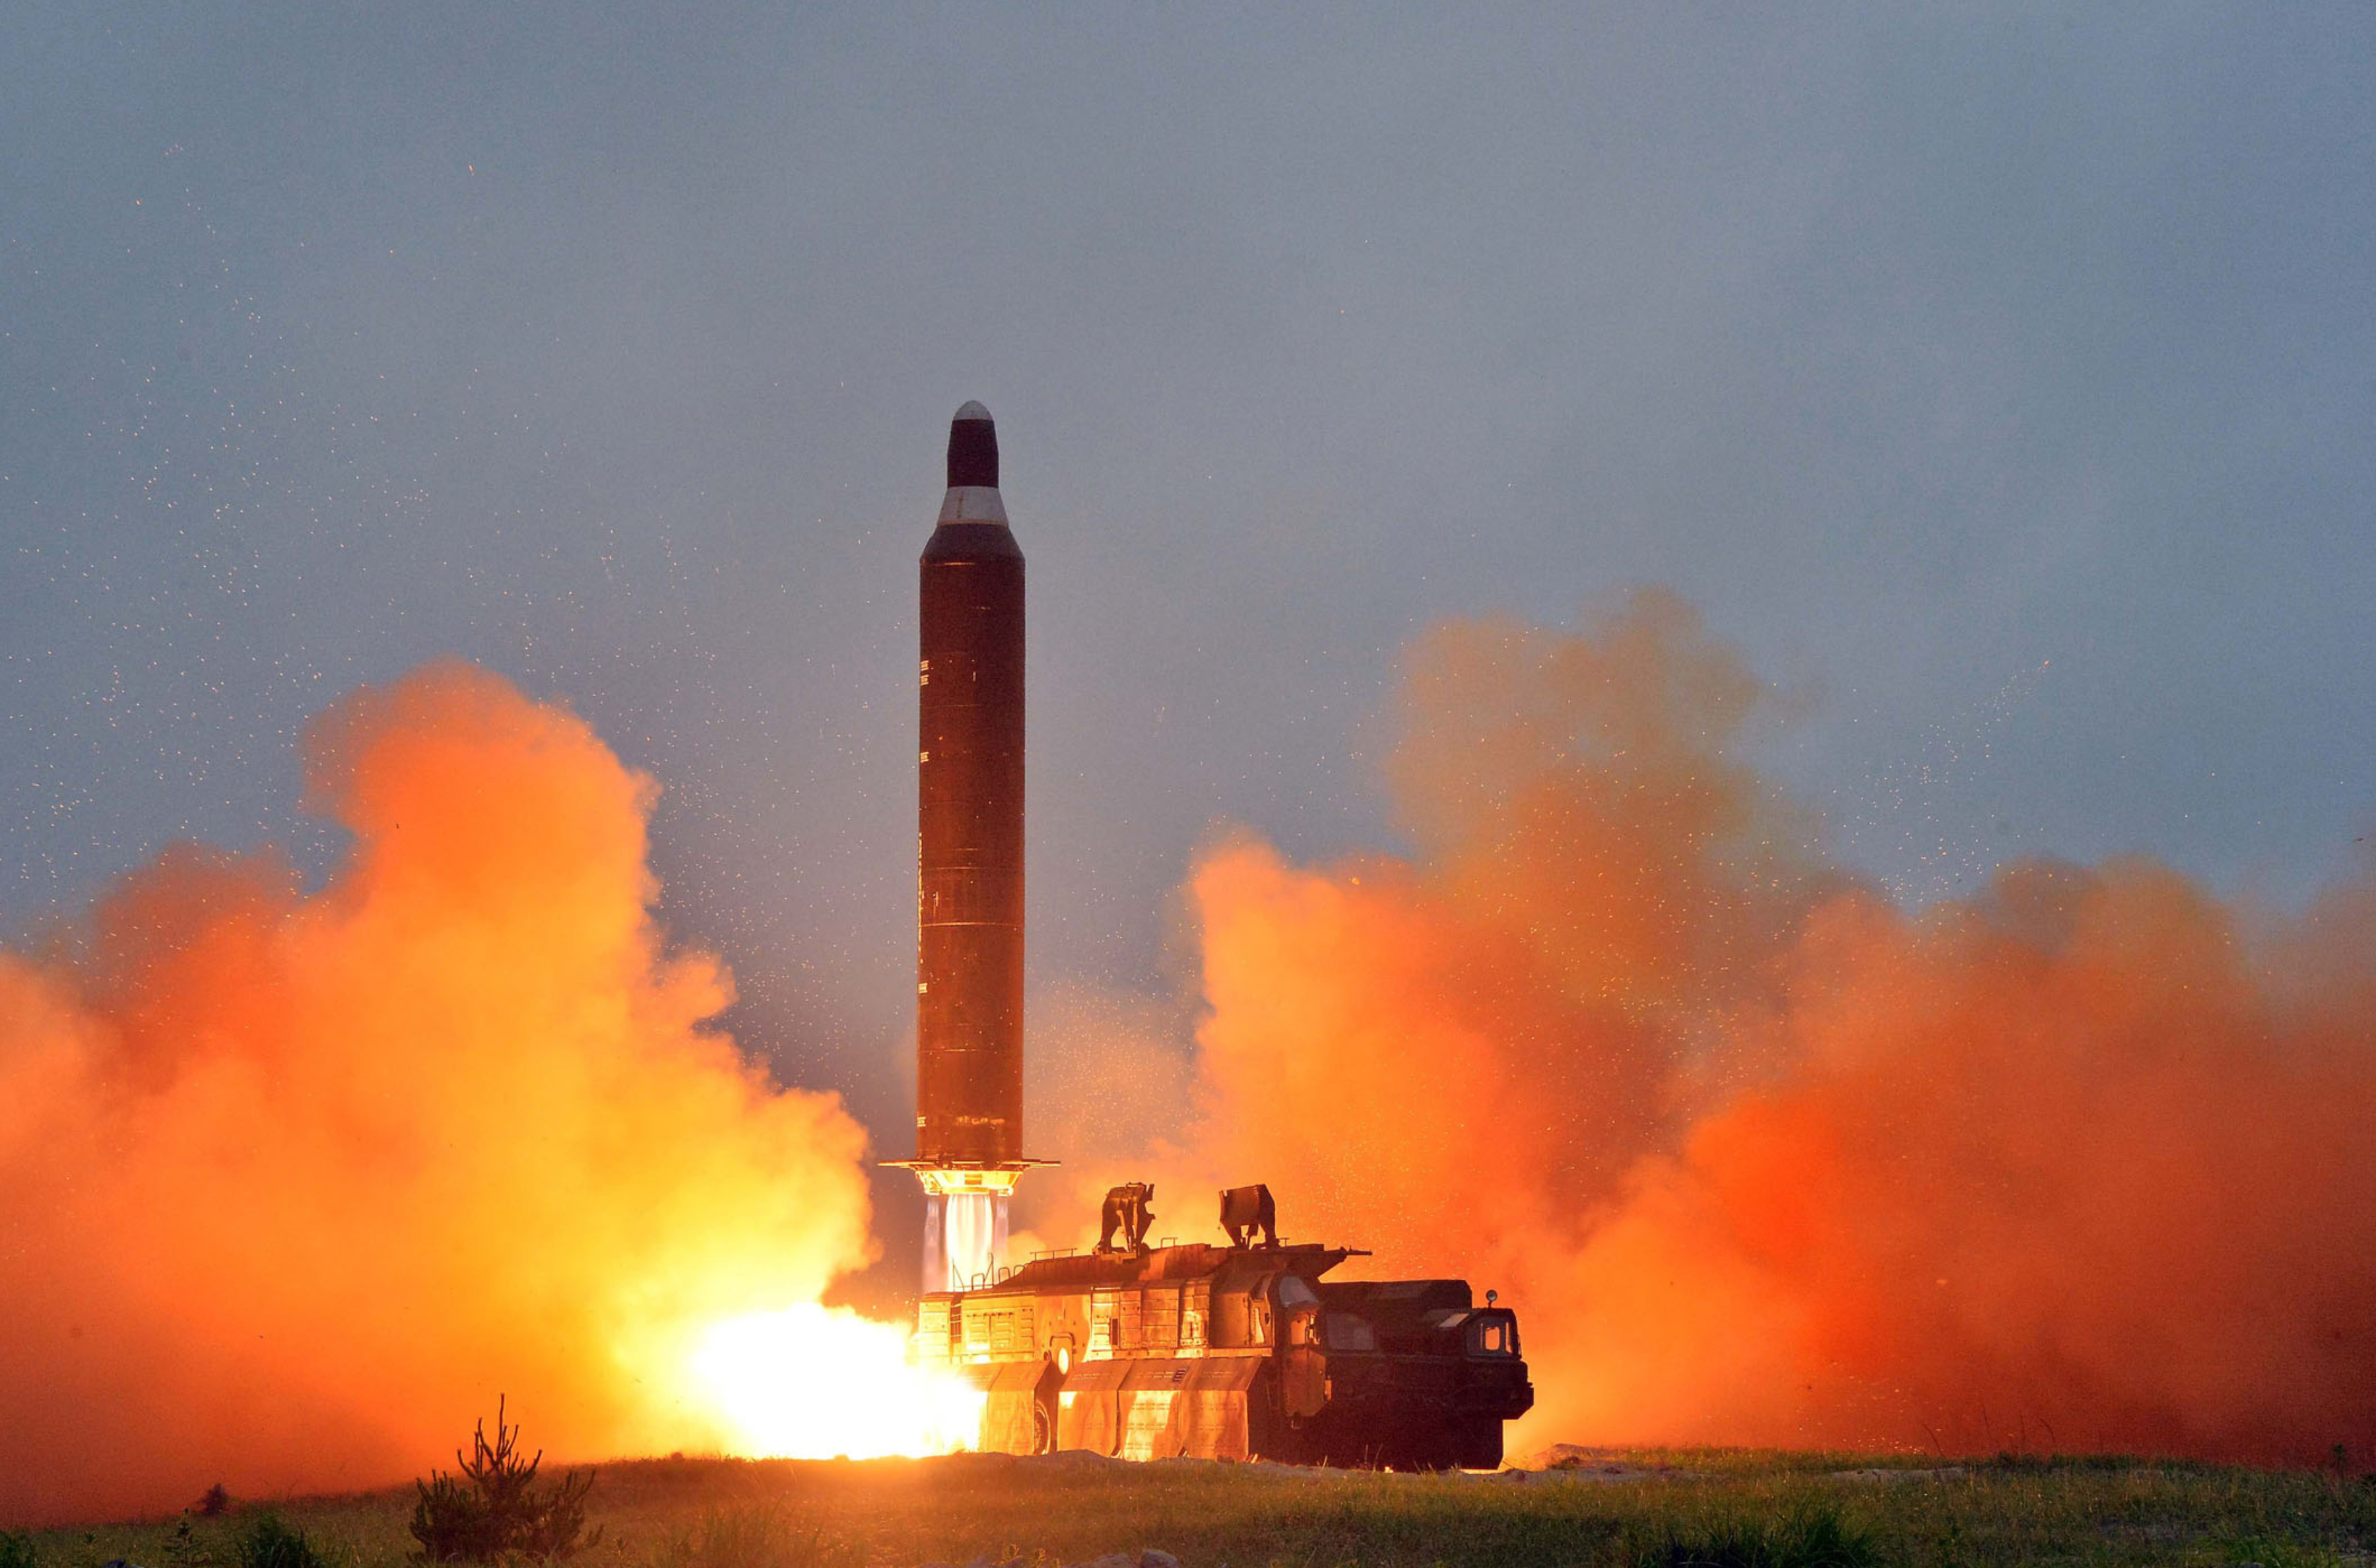 This undated picture released from North Korea's official Korean Central News Agency (KCNA) on June 23, 2016 shows a test launch of the surface-to-surface medium long-range strategic ballistic missile Hwasong-10 at an undisclosed location in North Korea. The Musudan -- also known as the Hwasong-10 -- has a theoretical range of anywhere between 2,500 and 4,000 kilometres (1,550 to 2,500 miles). / AFP PHOTO / KCNA VIA KNS / KCNA / South Korea OUT / REPUBLIC OF KOREA OUT   ---EDITORS NOTE--- RESTRICTED TO EDITORIAL USE - MANDATORY CREDIT "AFP PHOTO/KCNA VIA KNS" - NO MARKETING NO ADVERTISING CAMPAIGNS - DISTRIBUTED AS A SERVICE TO CLIENTS THIS PICTURE WAS MADE AVAILABLE BY A THIRD PARTY. AFP CAN NOT INDEPENDENTLY VERIFY THE AUTHENTICITY, LOCATION, DATE AND CONTENT OF THIS IMAGE. THIS PHOTO IS DISTRIBUTED EXACTLY AS RECEIVED BY AFP.  /